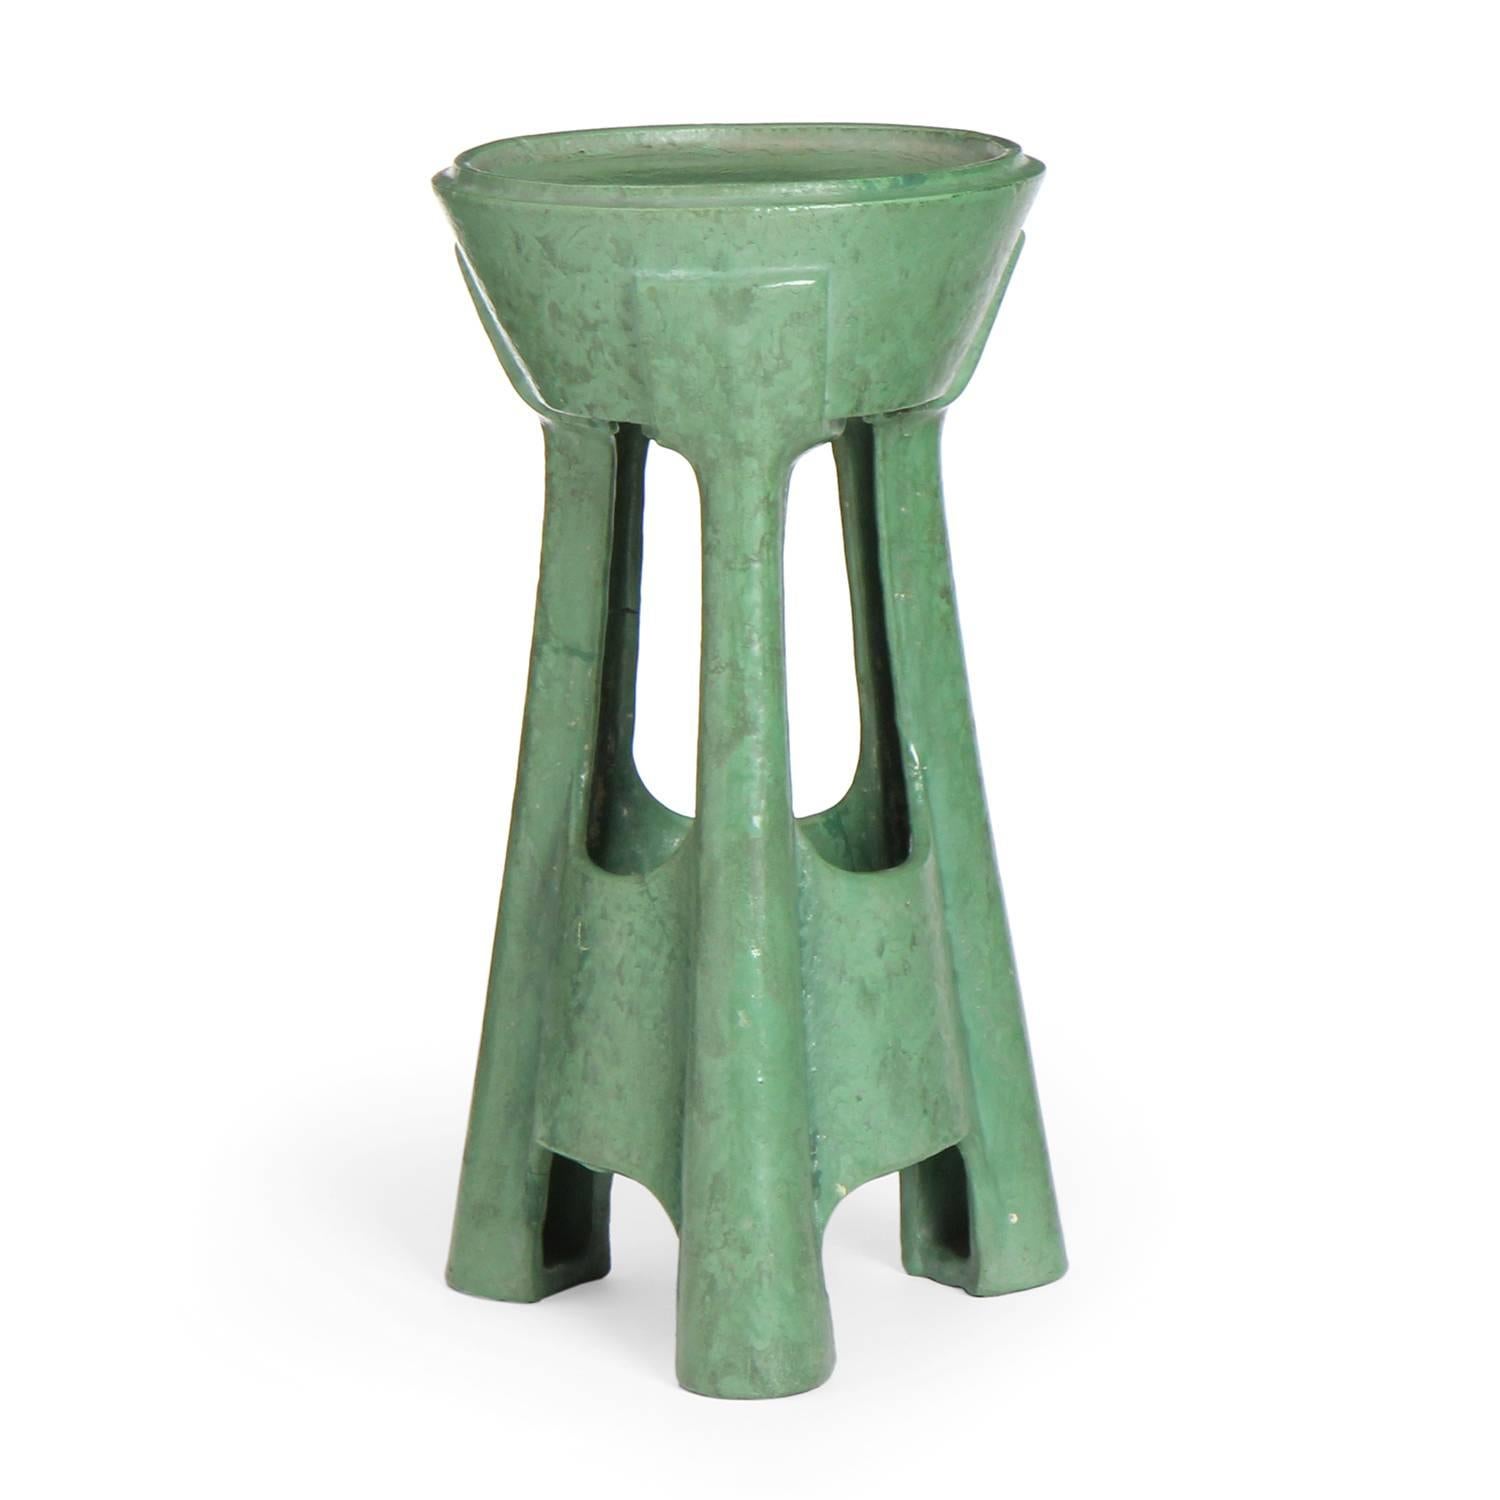 An interesting architectural ceramic stand or end table having a tapered top supported by three flaring organically shaped legs, the entire form covered in a rich and complex matte green glaze.